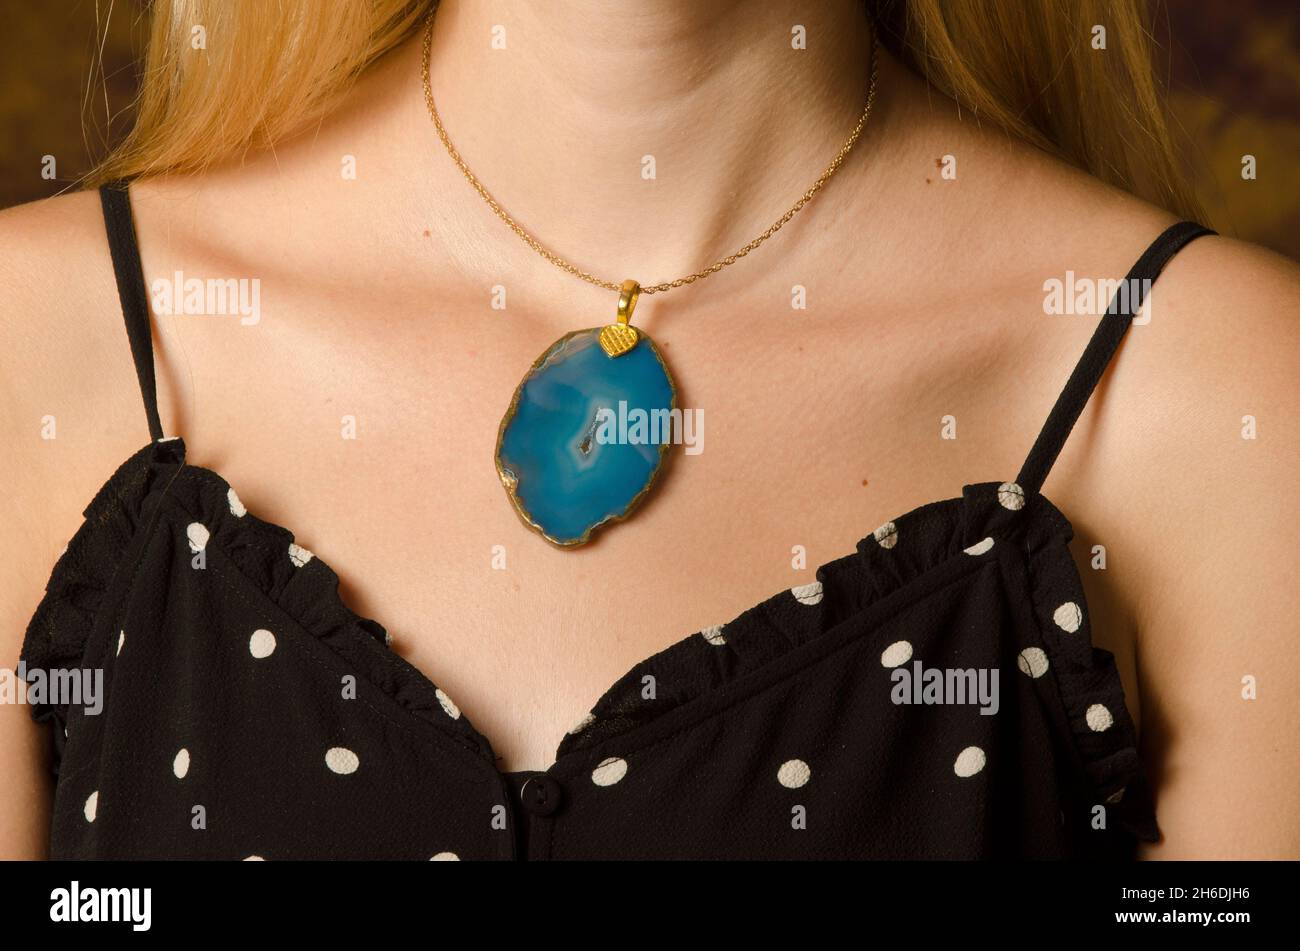 Handmade glass bead necklace around the neck of a female model Stock Photo